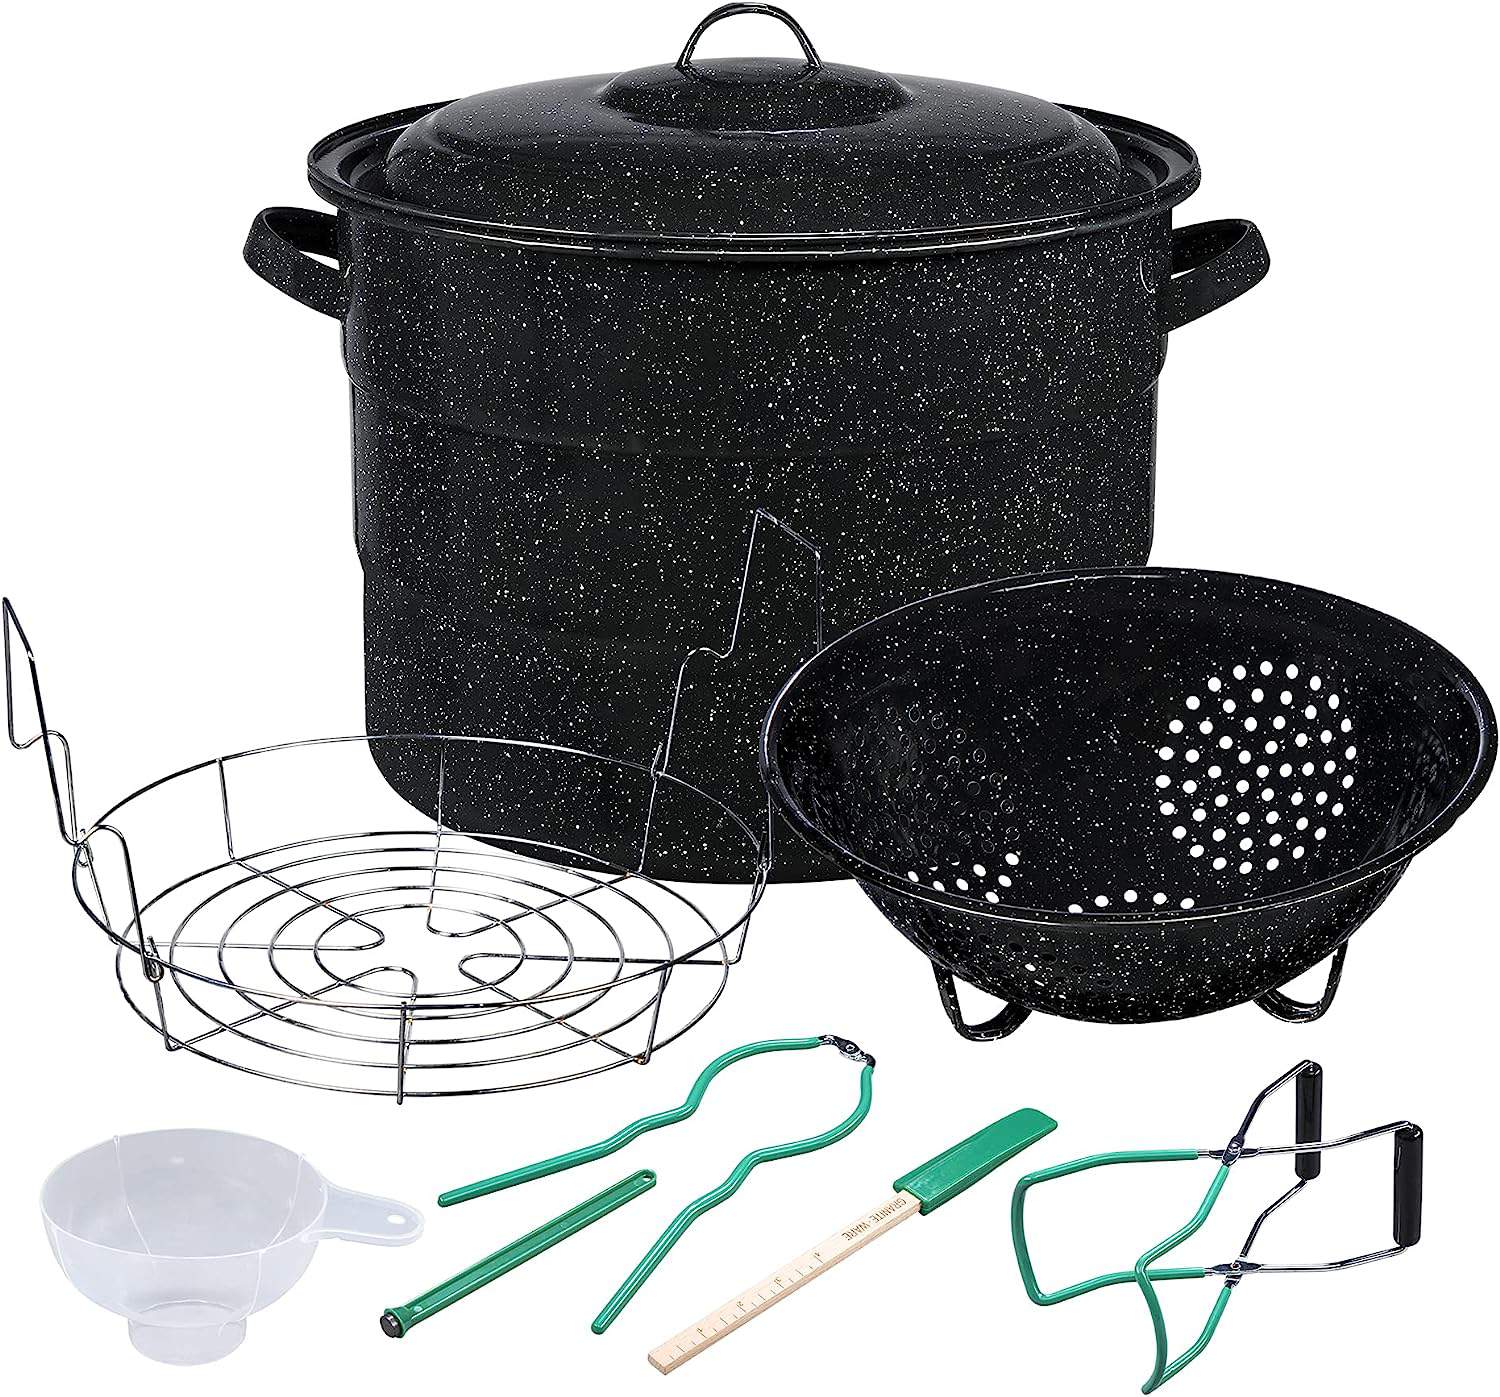 Granite Ware 9 Piece Enamelware Water bath Canning Pot (Speckled Black) with Canning Toolset, Colander and Rack. Canning Supplies Starter Kit